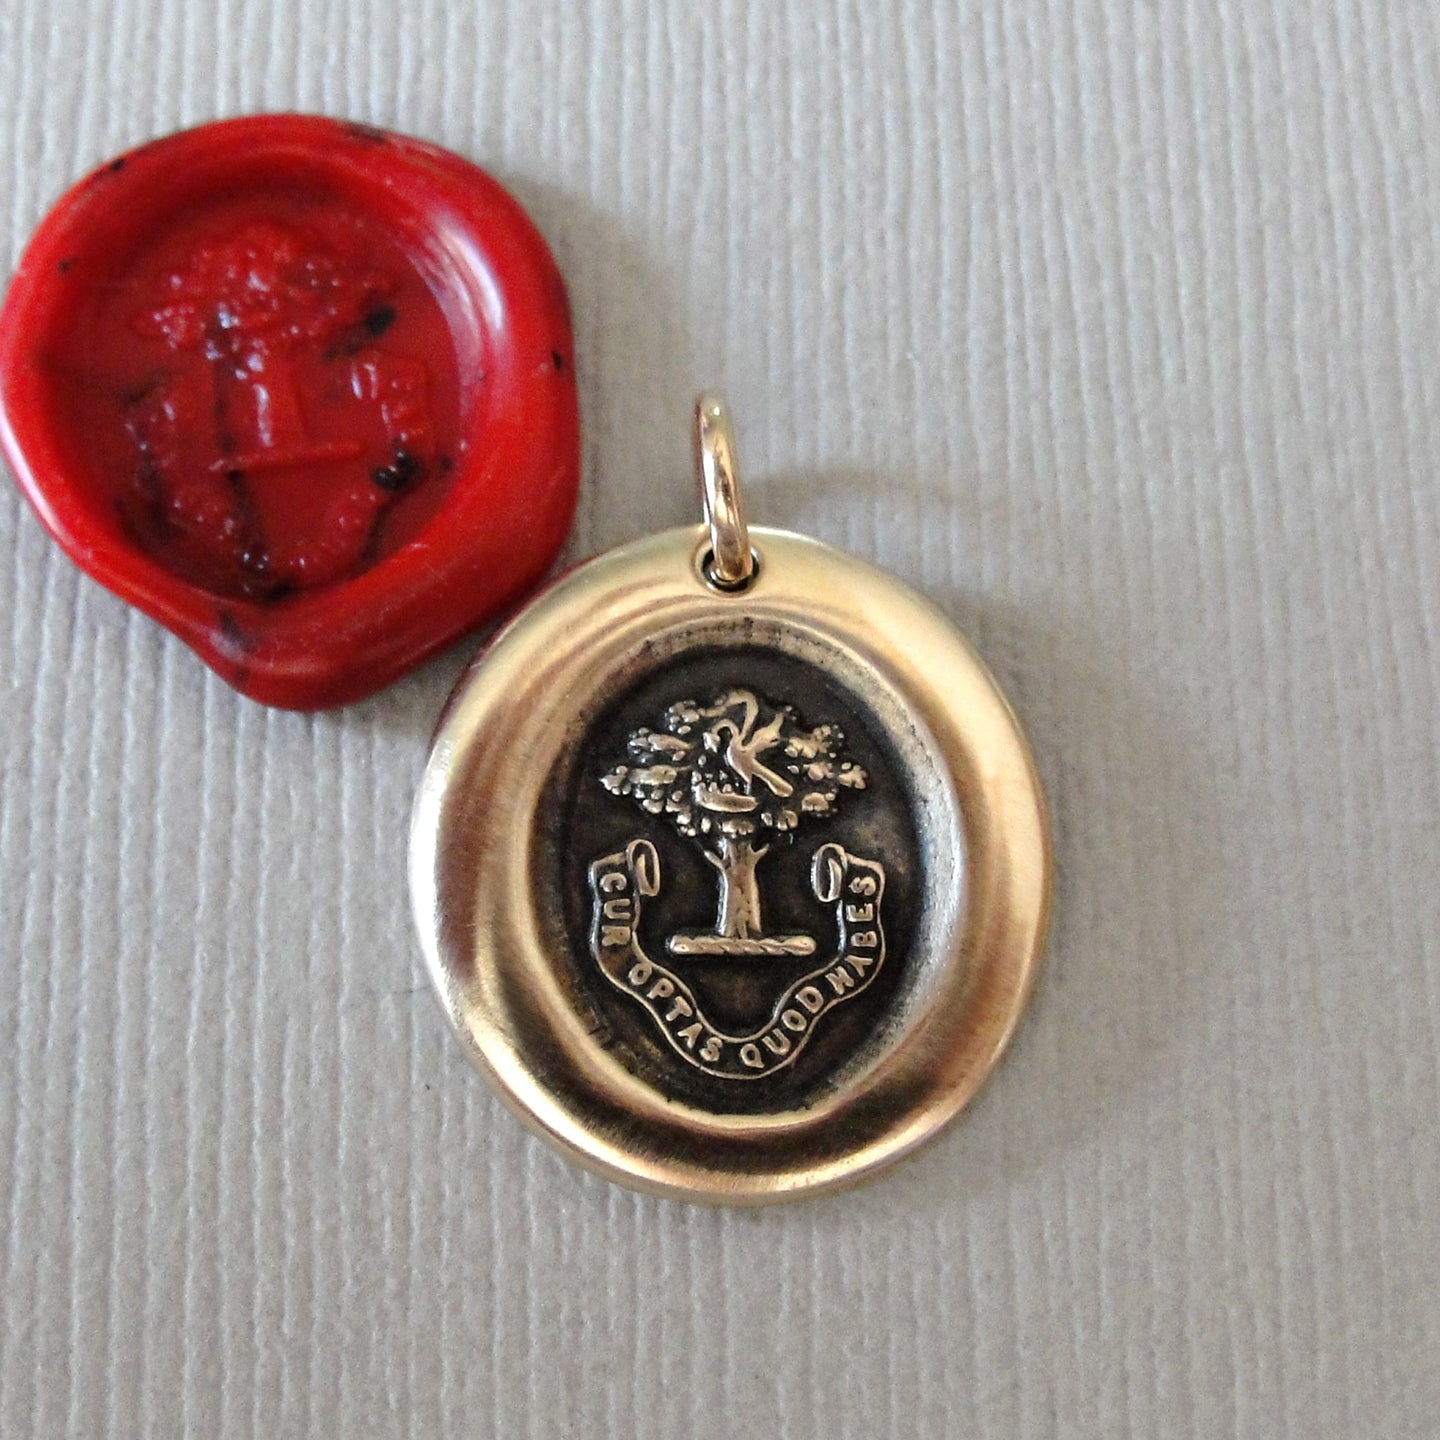 Why Wish For What You Have - Tree of Life Antique Bronze Wax Seal Pendant Jewelry Pelican Piety